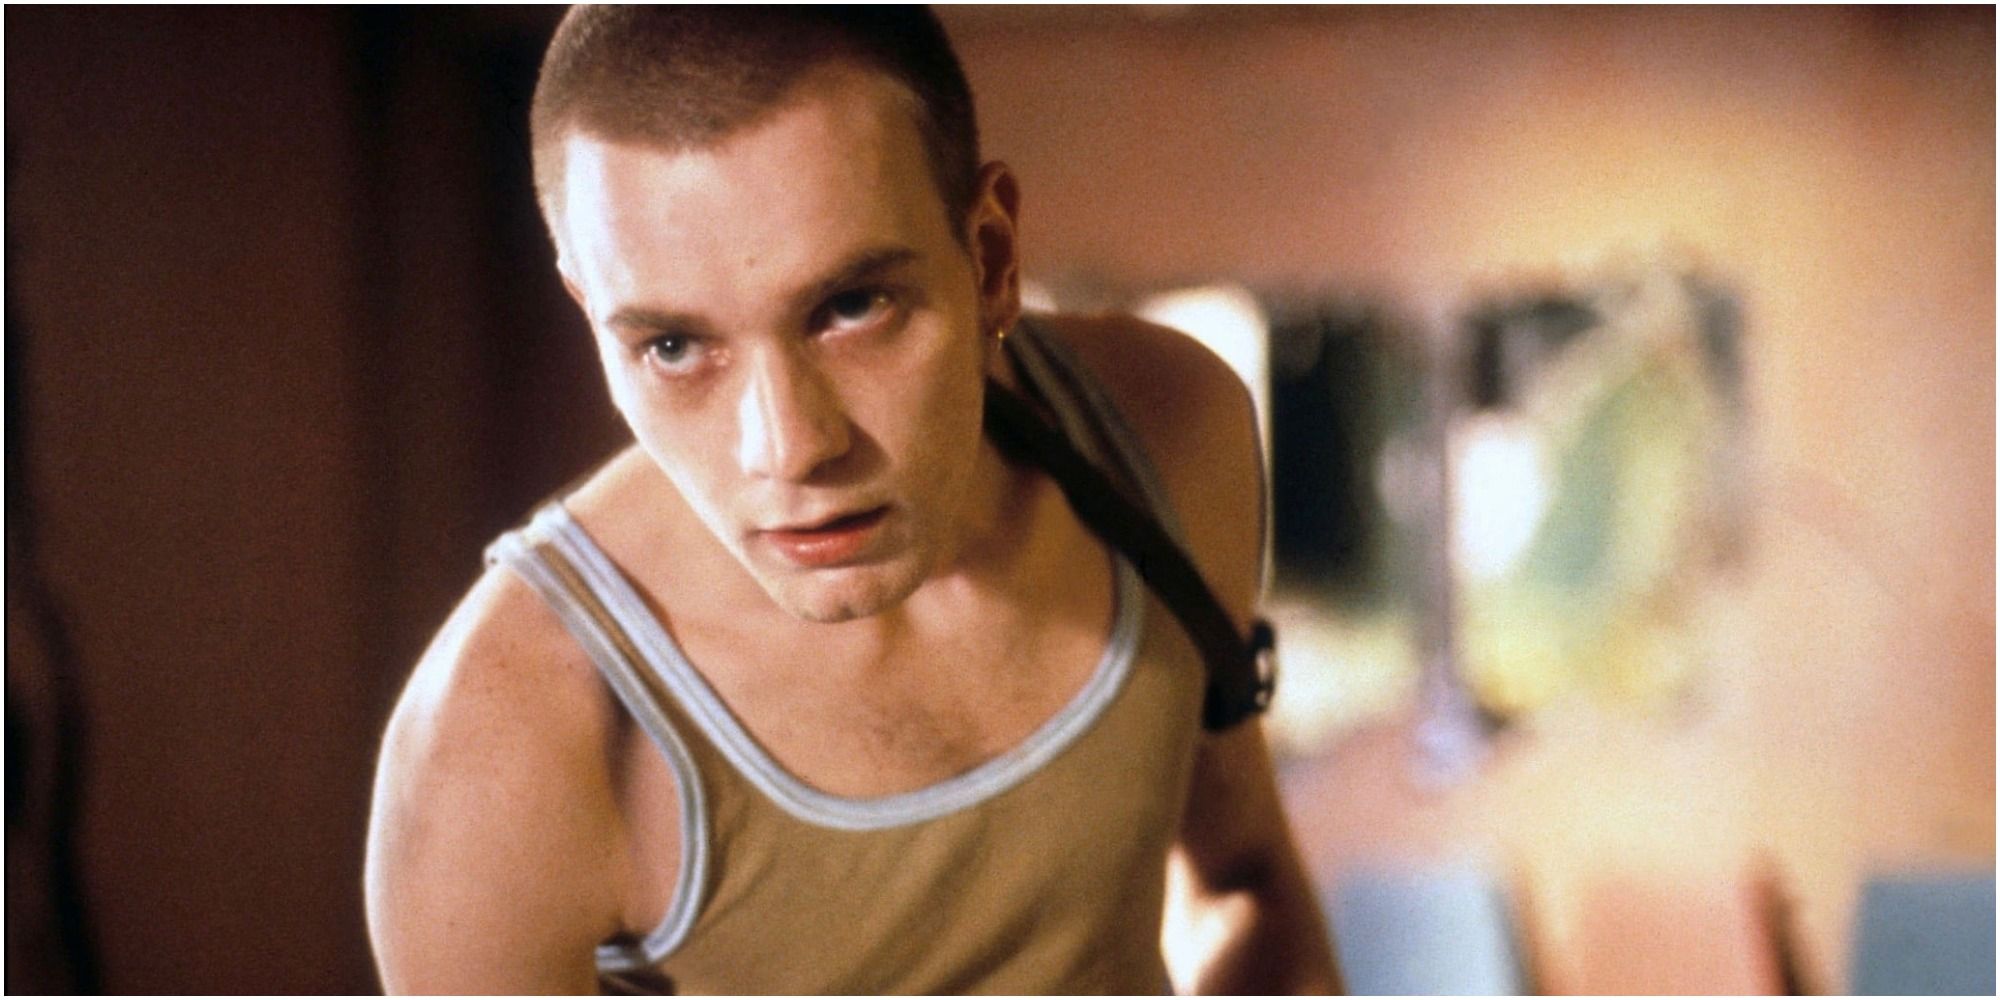 Danny Boyle’s 10 Best Movies (According To Rotten Tomatoes)